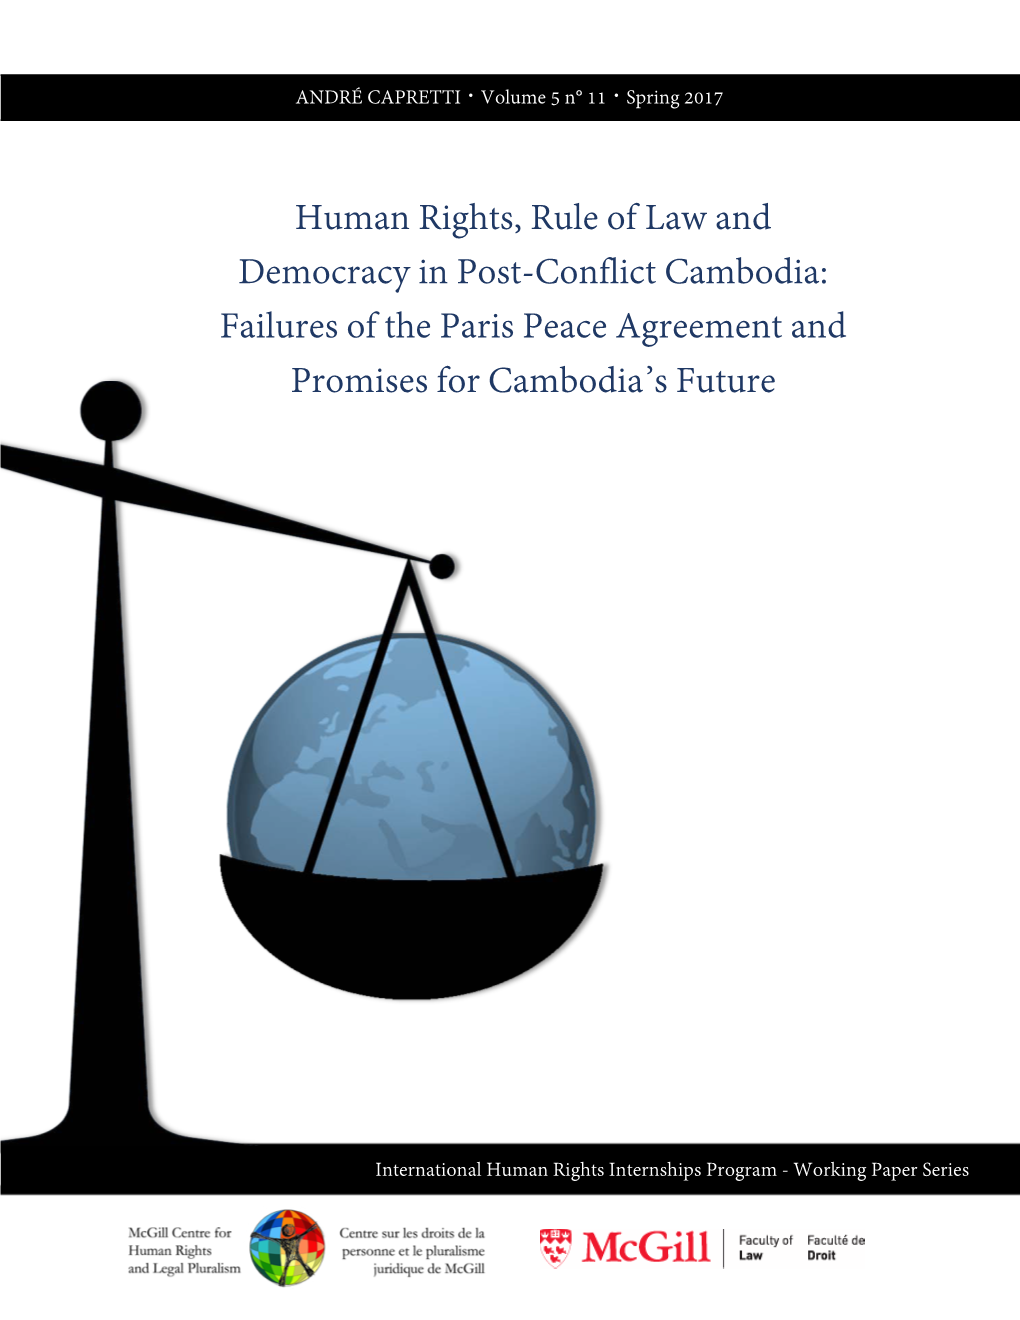 Human Rights, Rule of Law and Democracy in Post-Conflict Cambodia: Failures of the Paris Peace Agreement and Promises for Cambodia’S Future